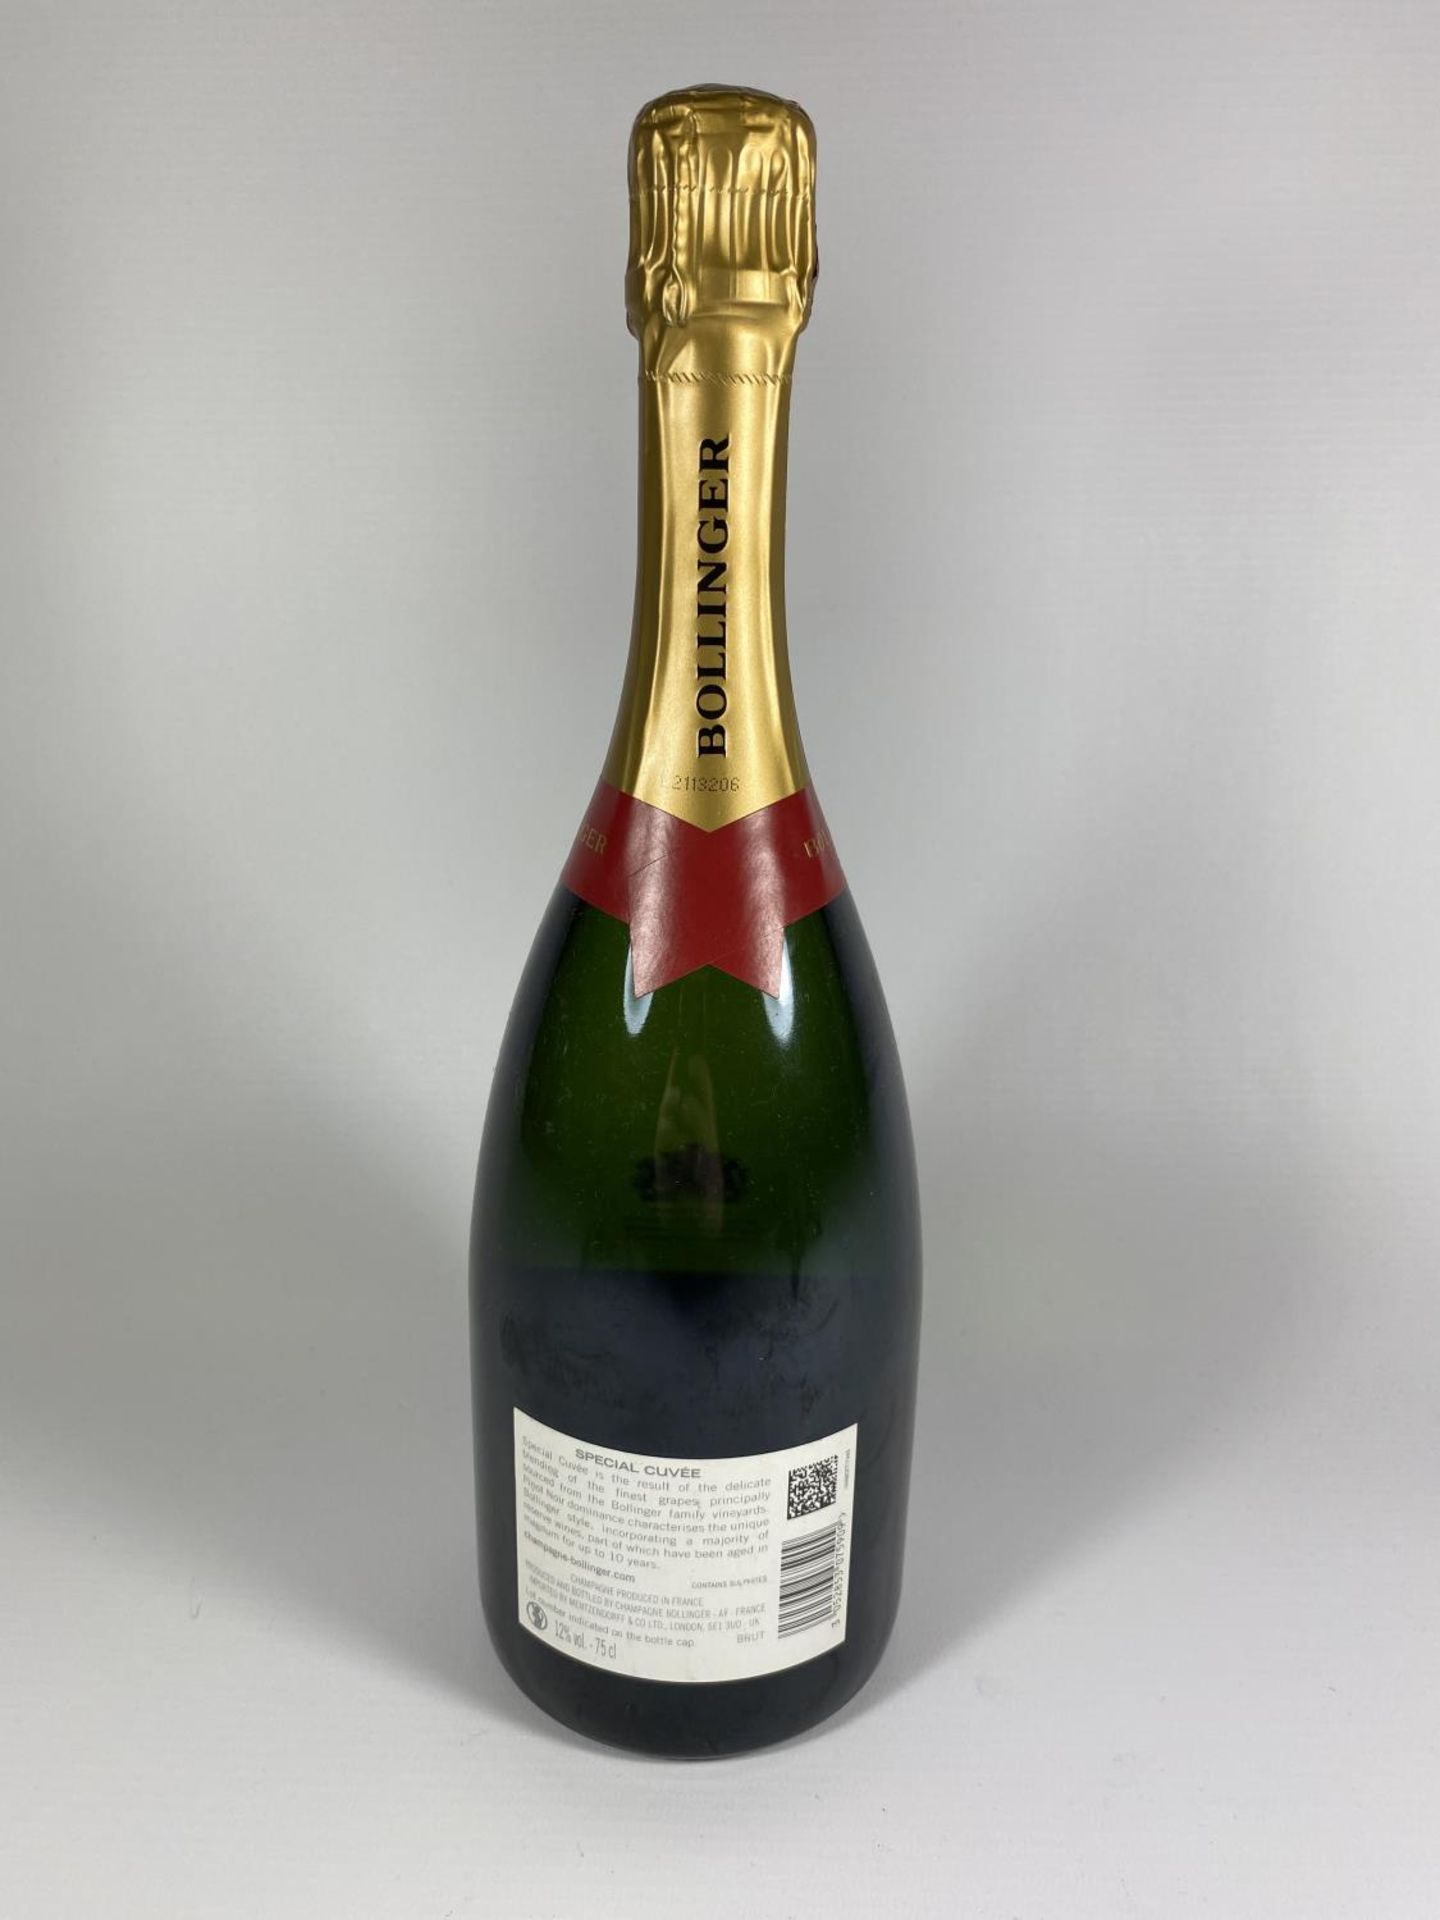 1 X 75CL BOTTLE - BOLLINGER SPECIAL CUVEE CHAMPAGNE - Image 3 of 3